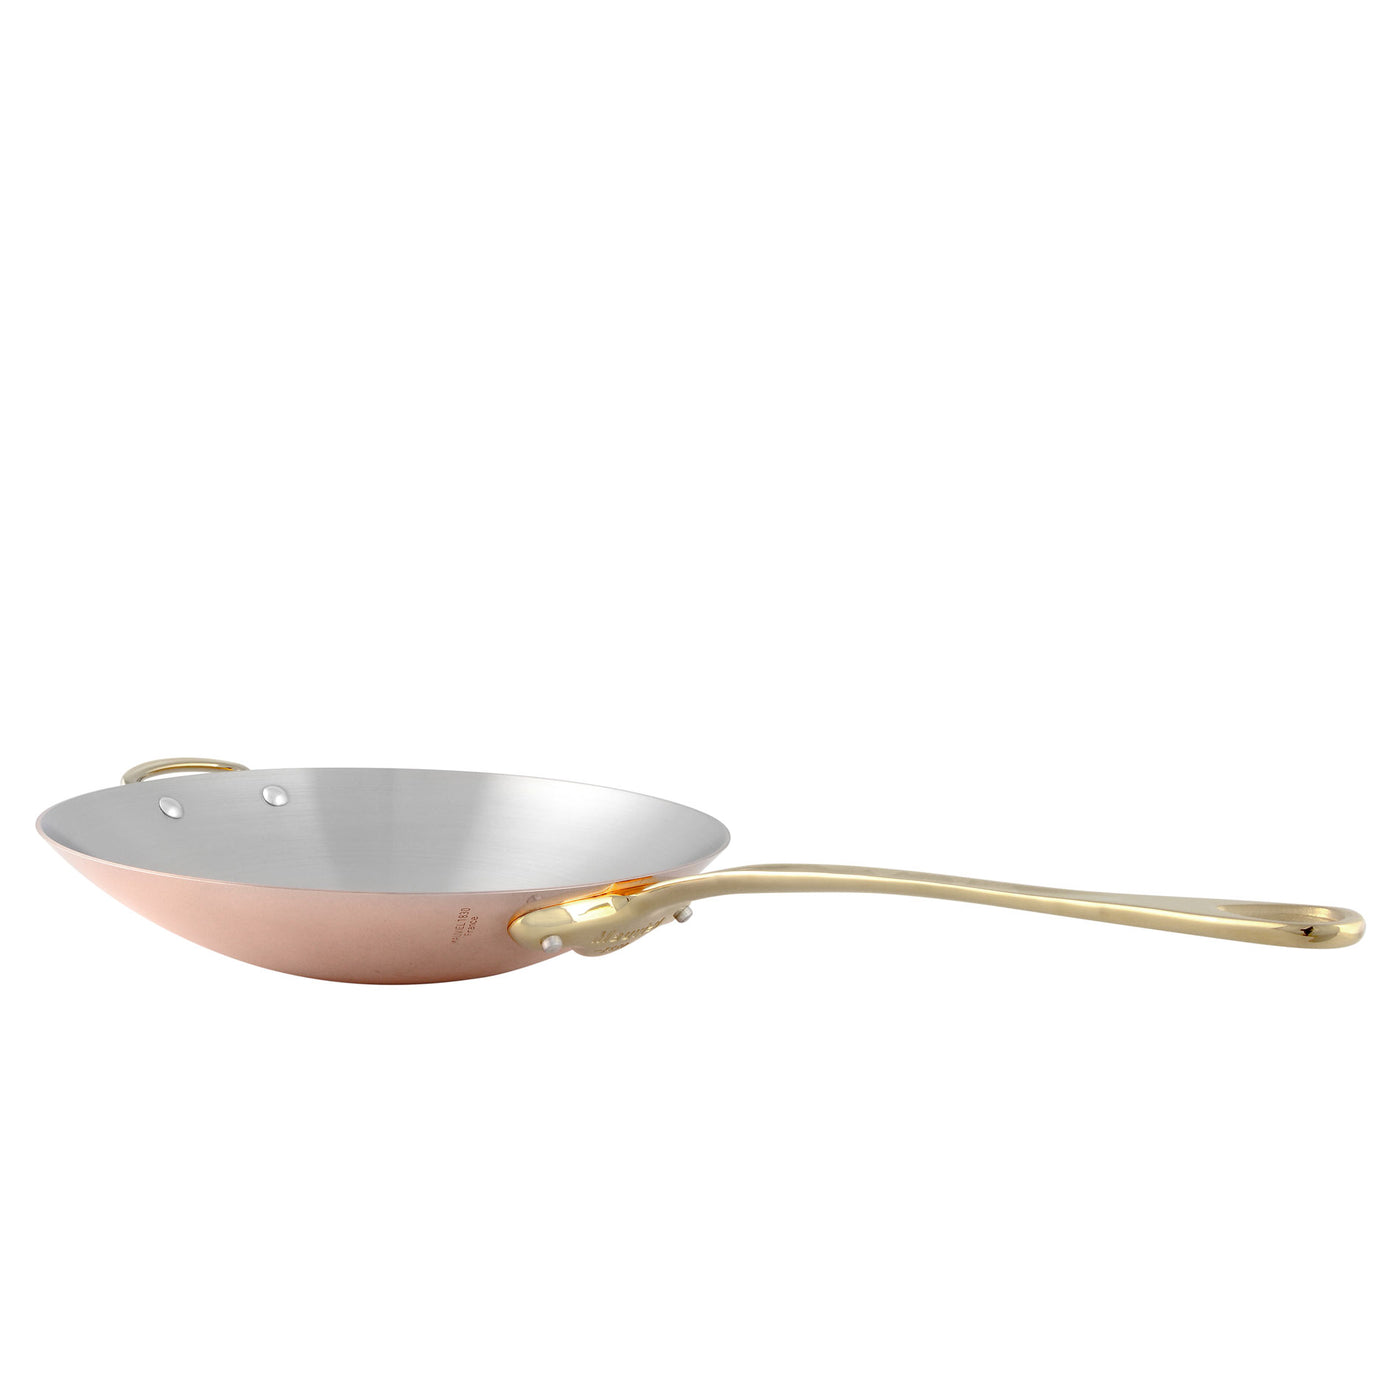 Mauviel M'heritage M150B Copper Wok with Brass Handle, 11.8-in - Kitchen Universe